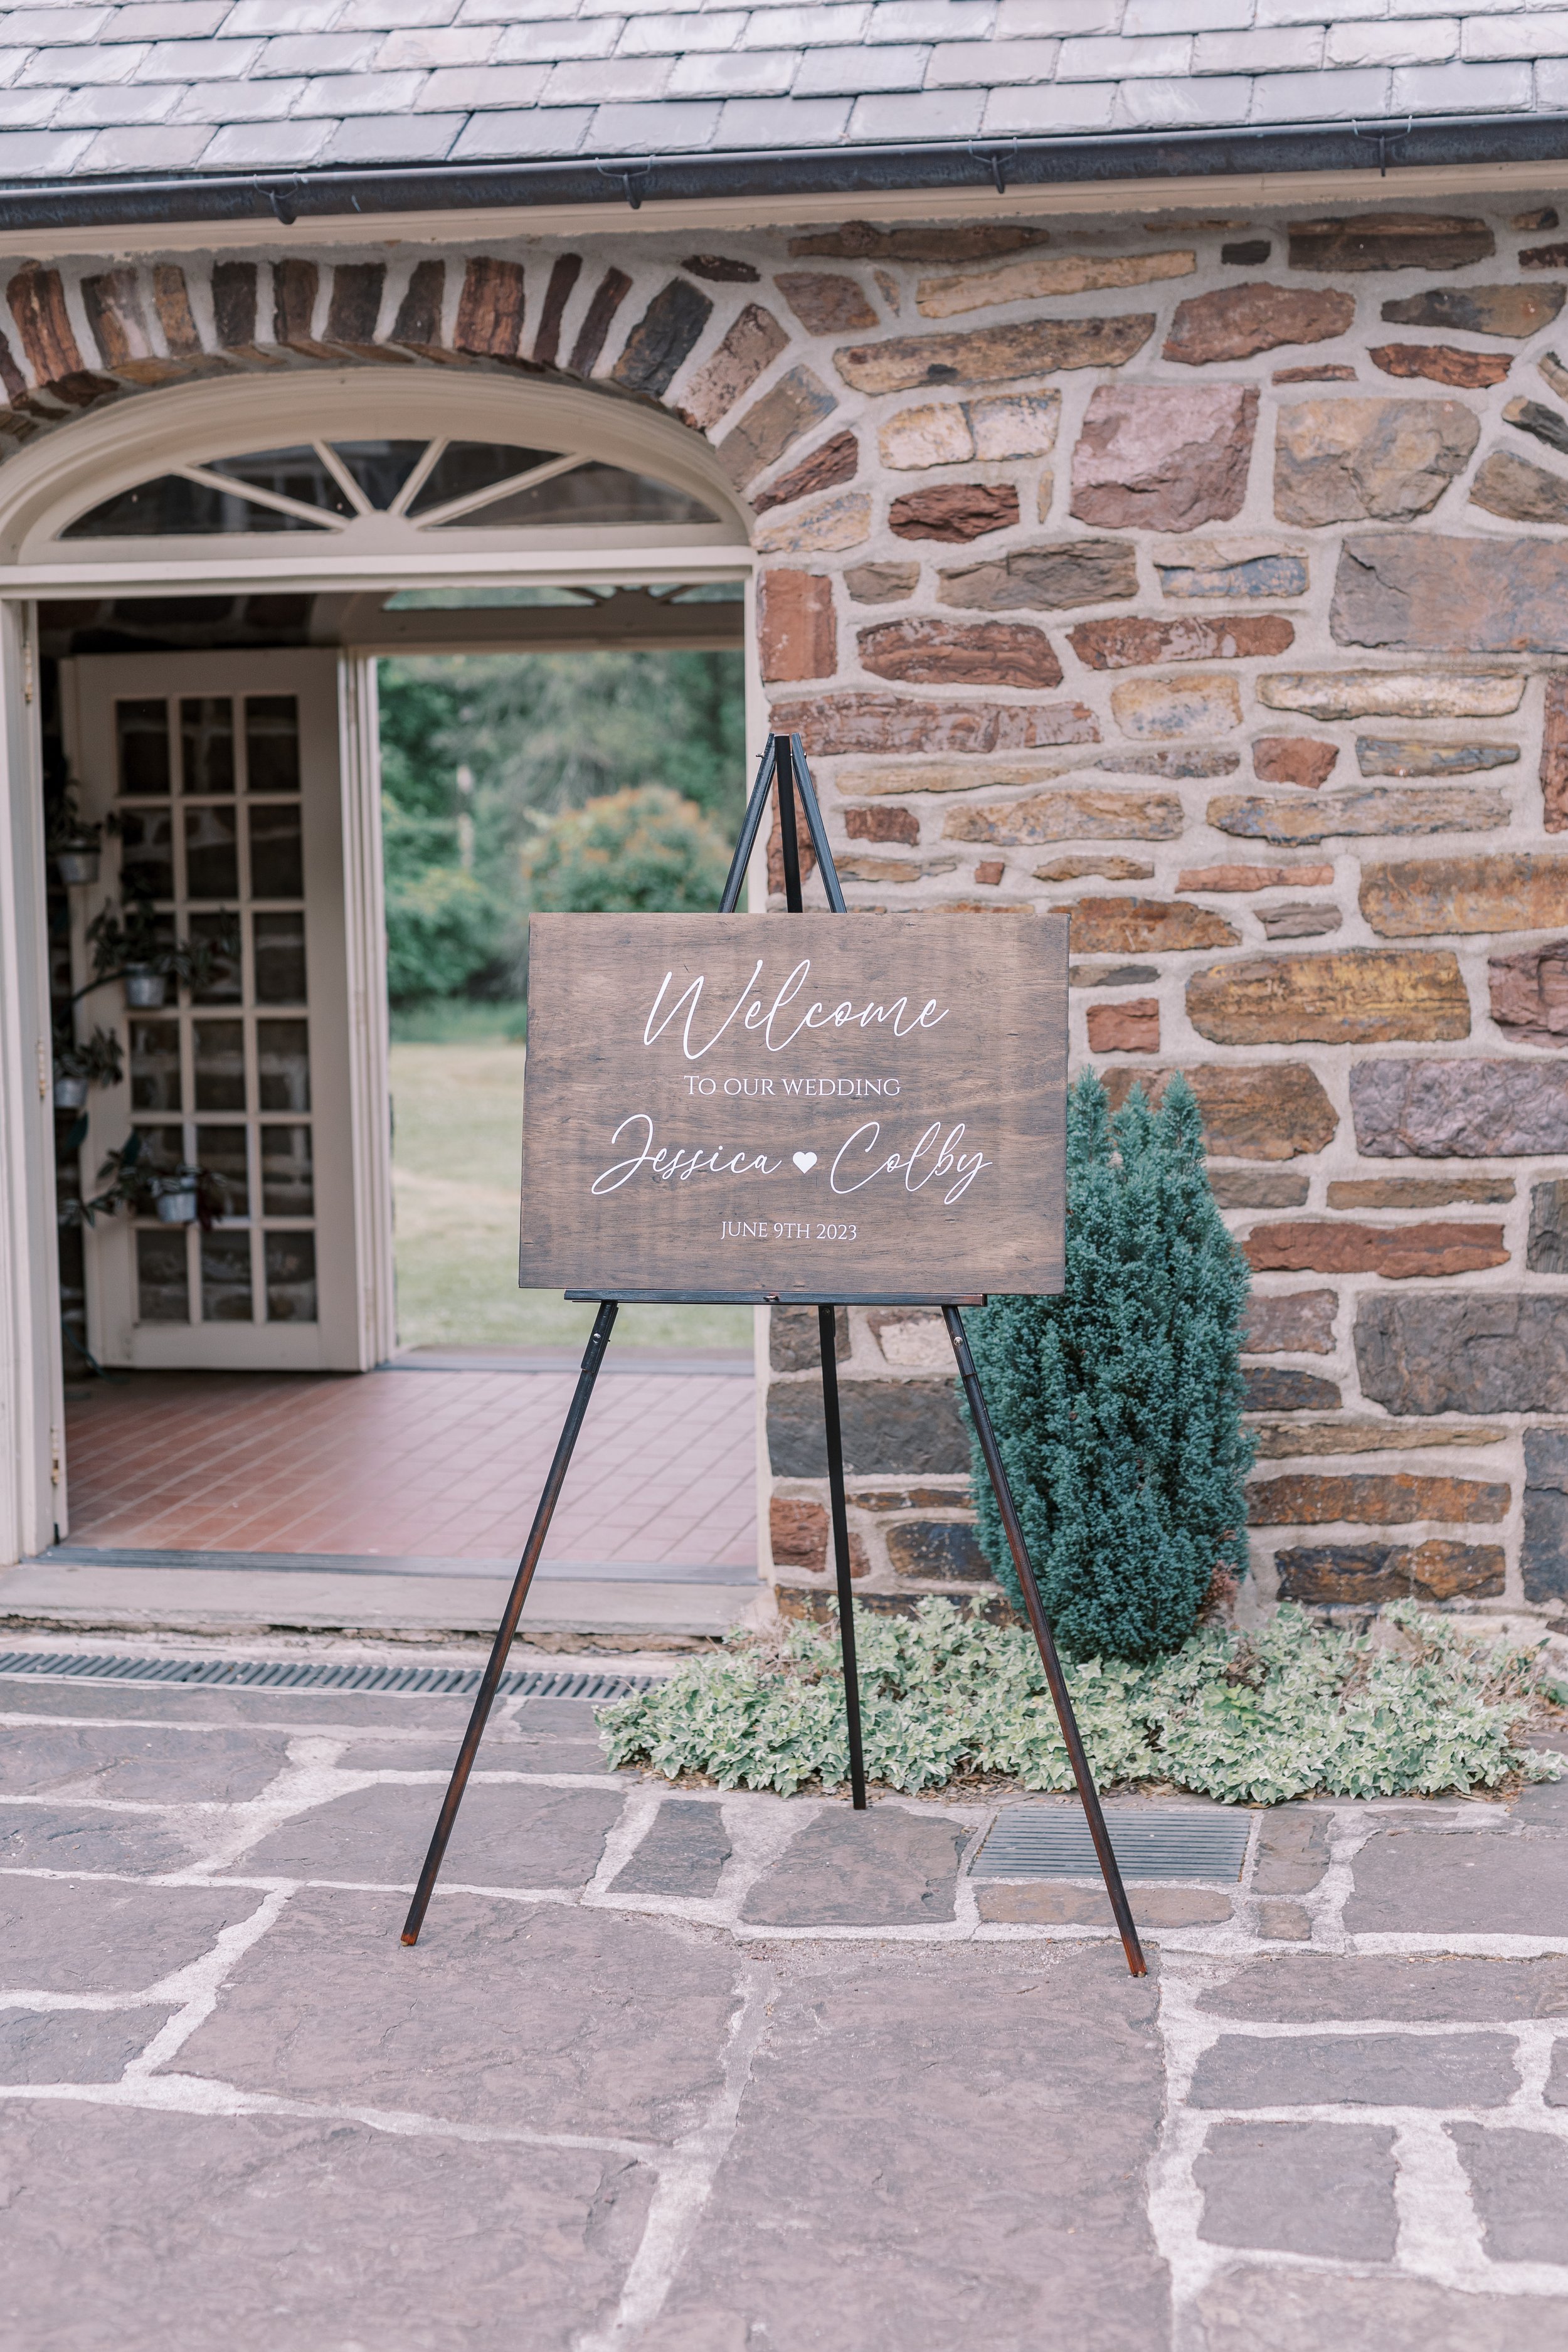 Jessica and Colby's Wedding at Pearl S Buck House